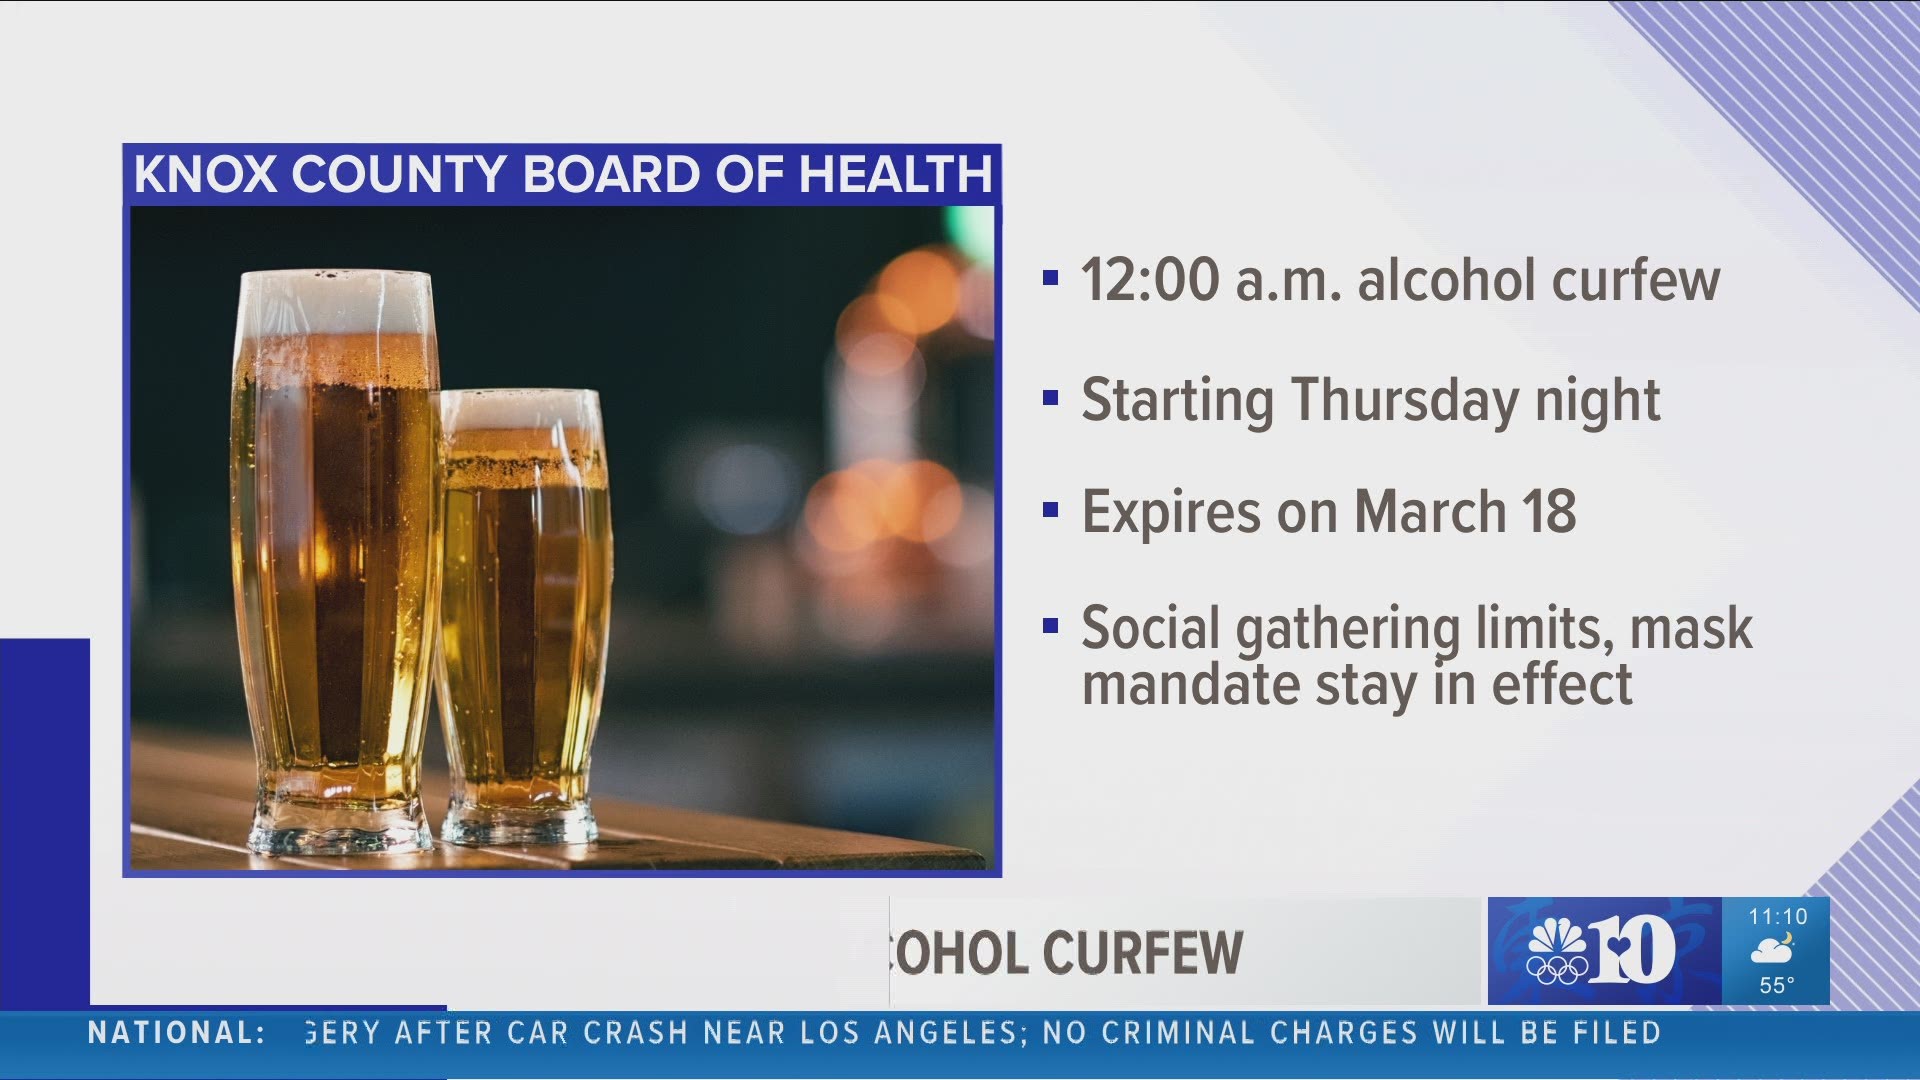 Bars and restaurants will be able to stay open until midnight after the Knox County Board of Health passed a new alcohol curfew on Wednesday.